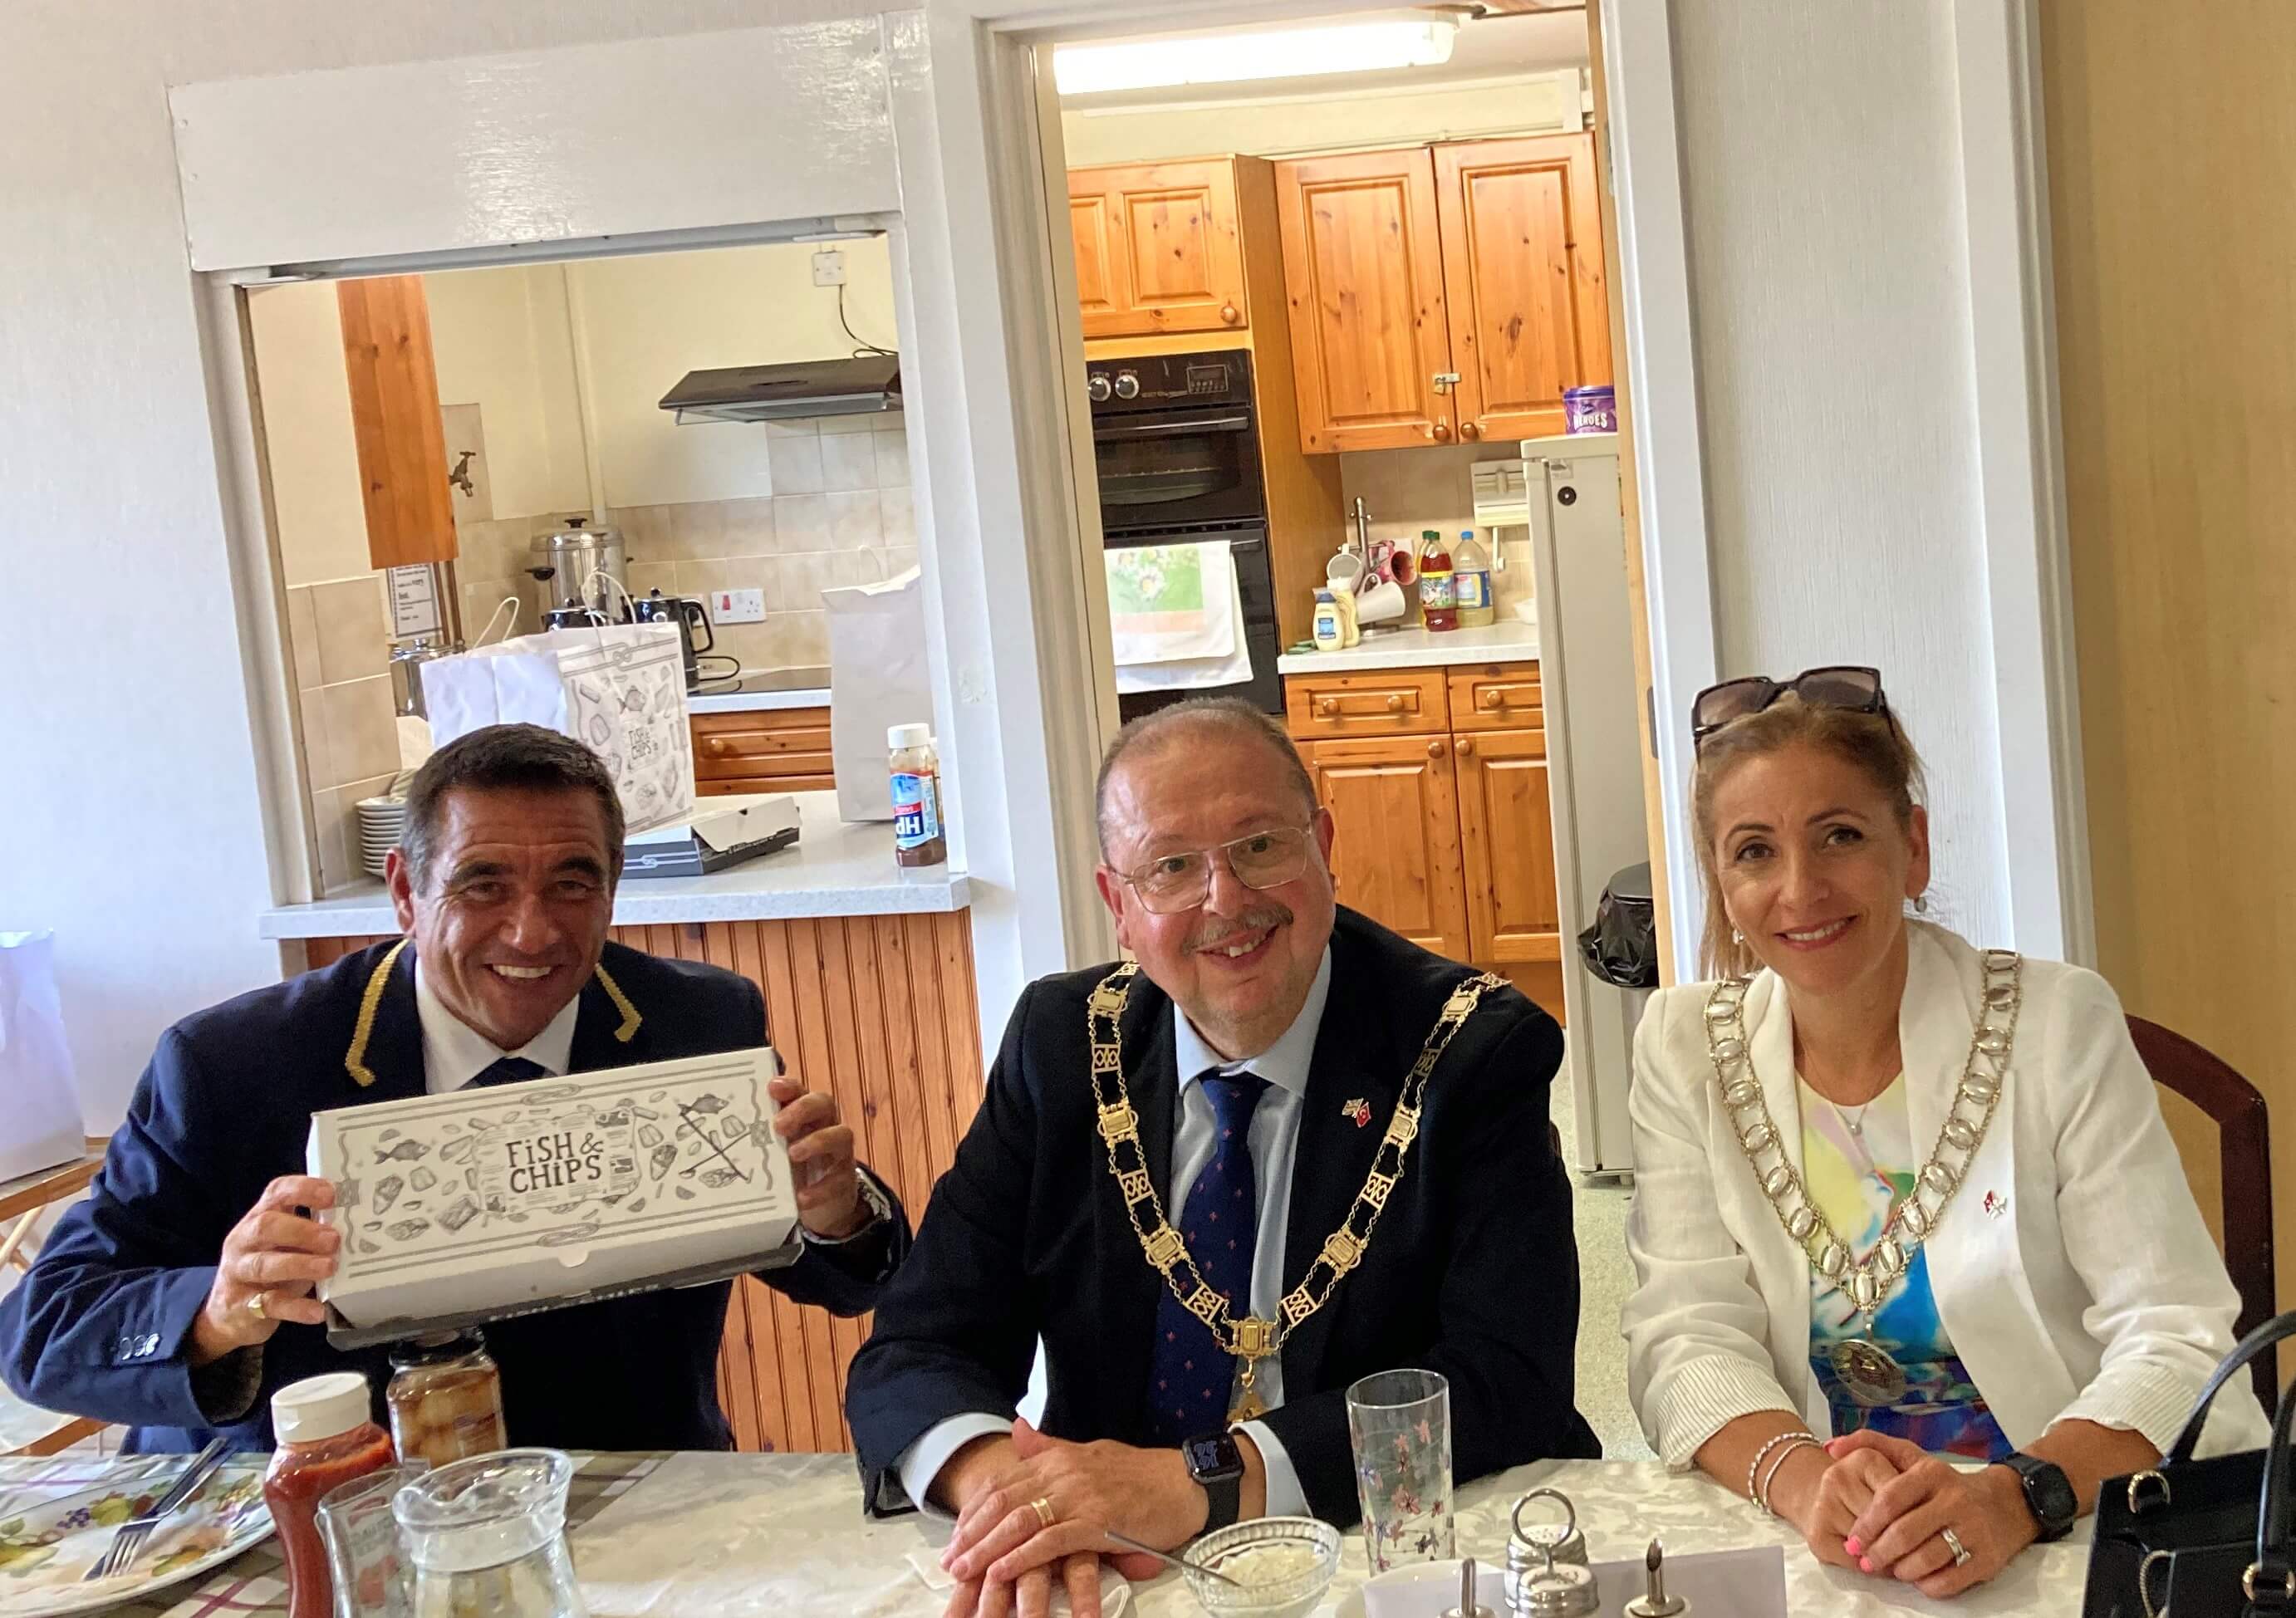 The mayor and mayoress eating in a independent living scheme fish and chips